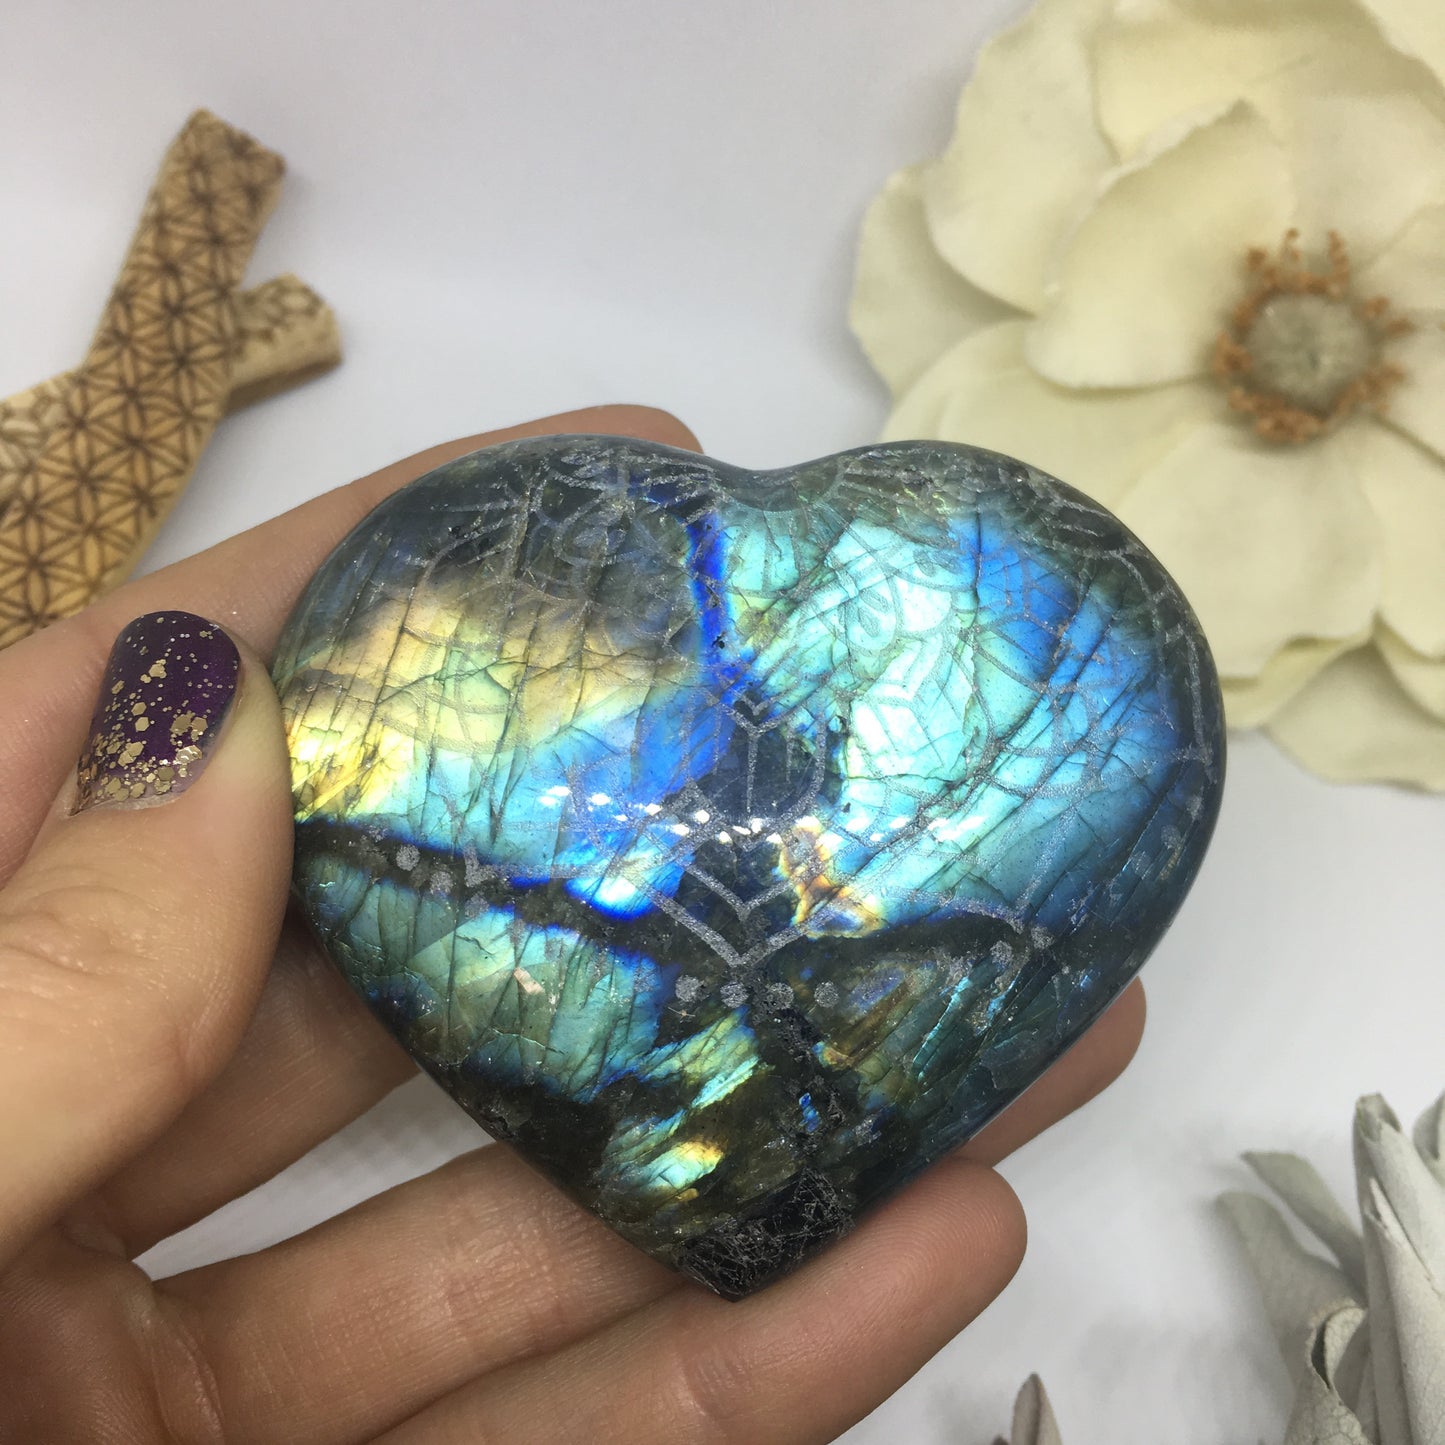 Flashy Blue and Gold Labradorite Heart Etched with Radiate Bliss Mandala 3 - Fractalista Designs